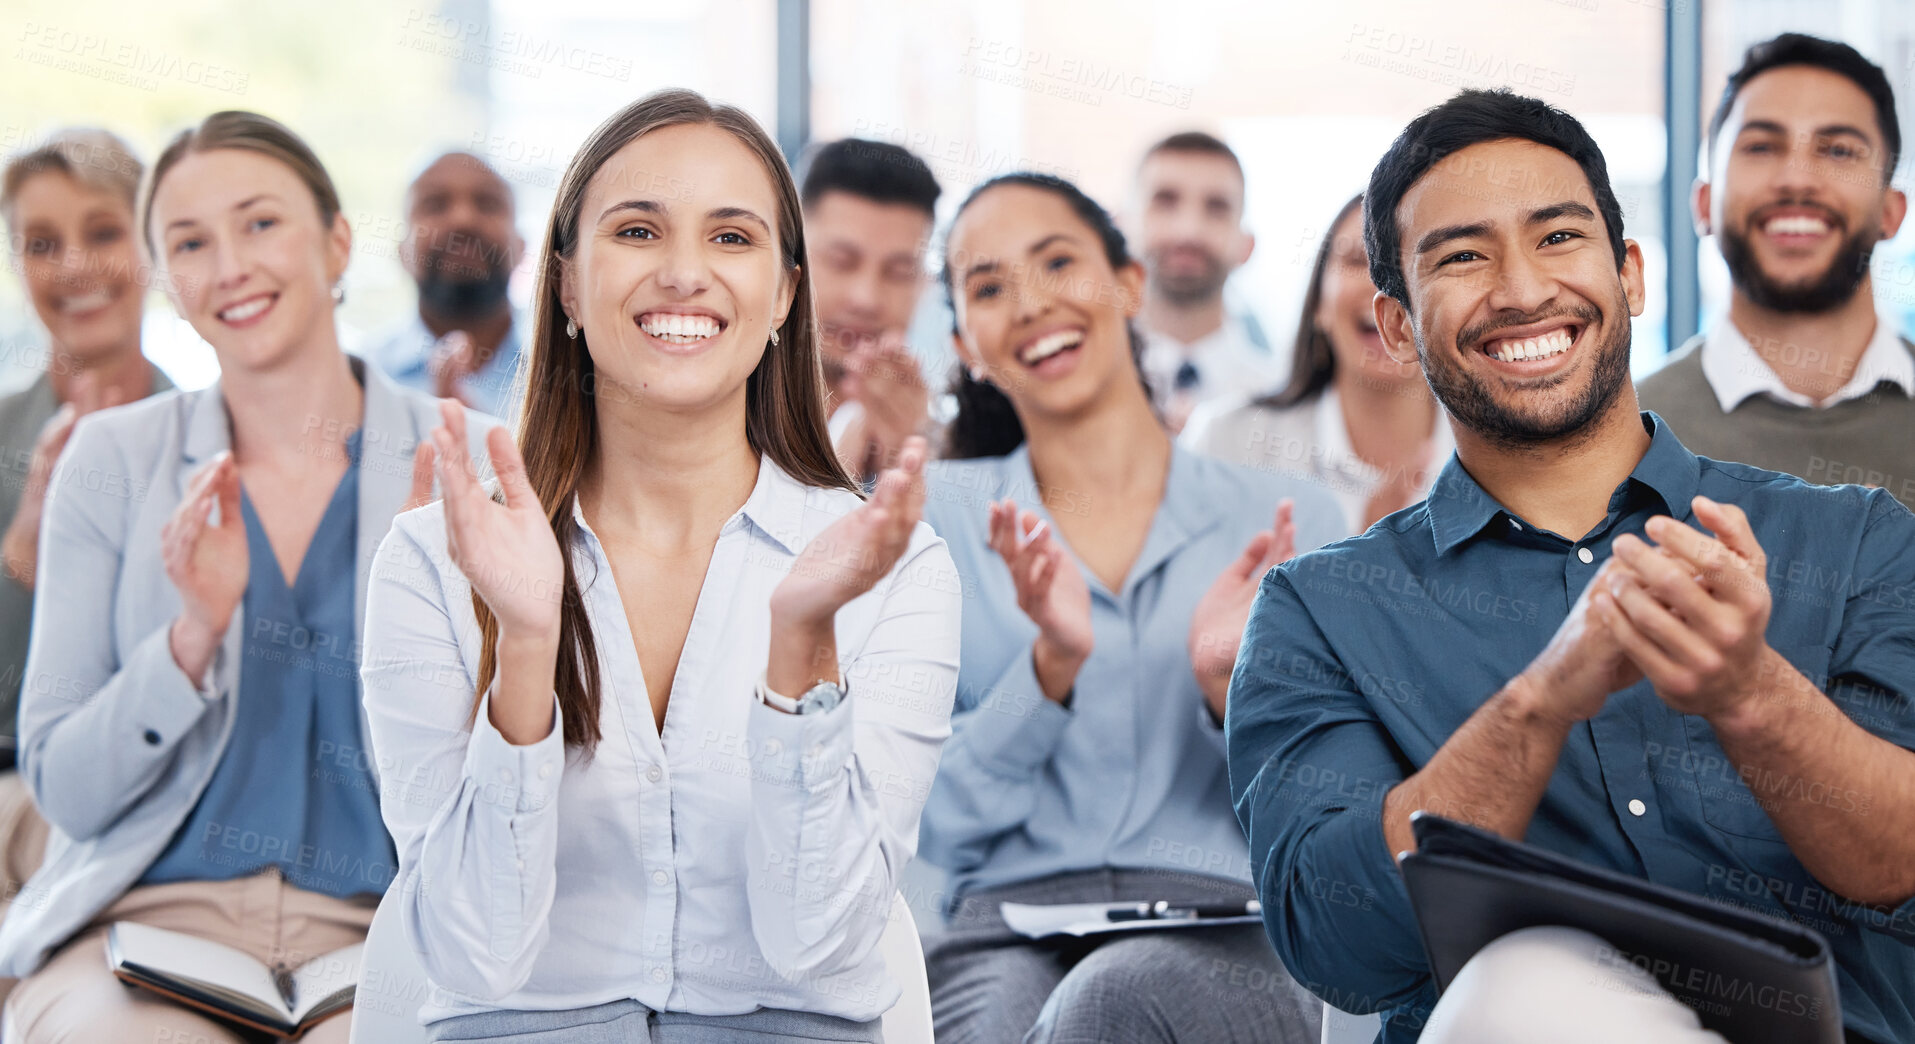 Buy stock photo Applause, happy and business people as an audience at a seminar with support or motivation. Smile, team and employees clapping hands for success, agreement or celebration at a workshop or conference